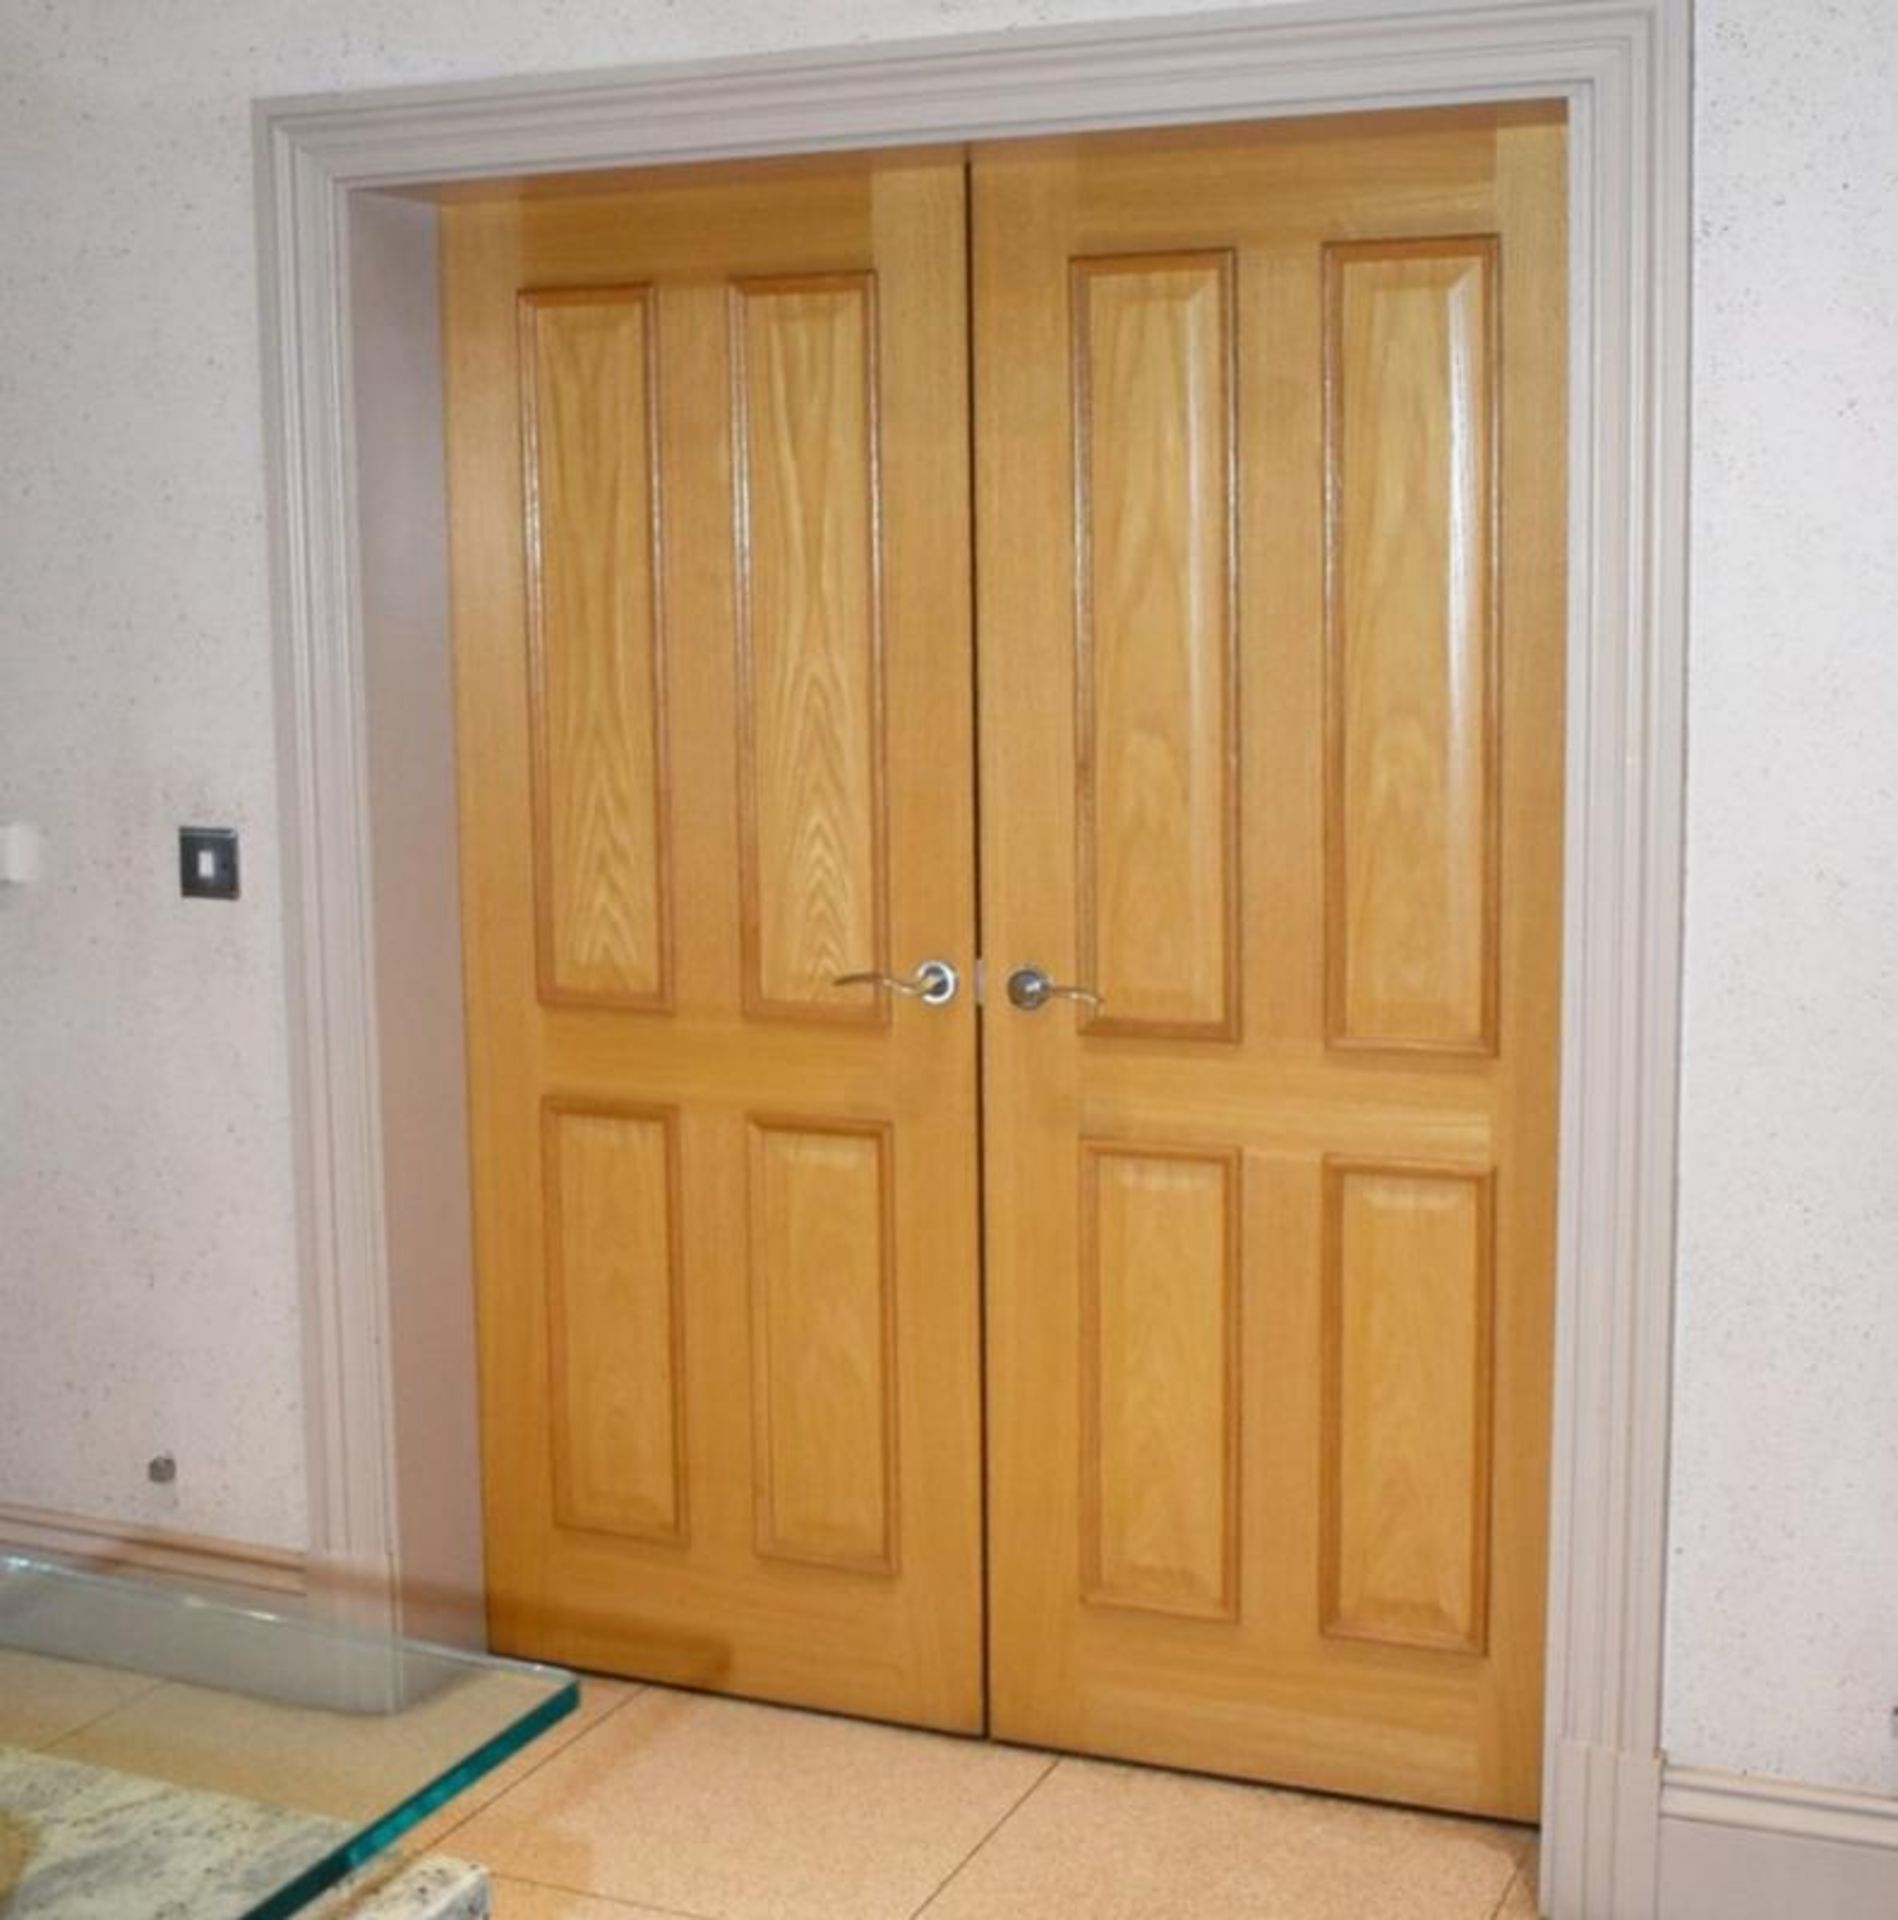 A Pair Of High Quality Internal Wooden Doors - Dimensions Of Each: H200 x W75 x 7cm - Ref: ABR016 /